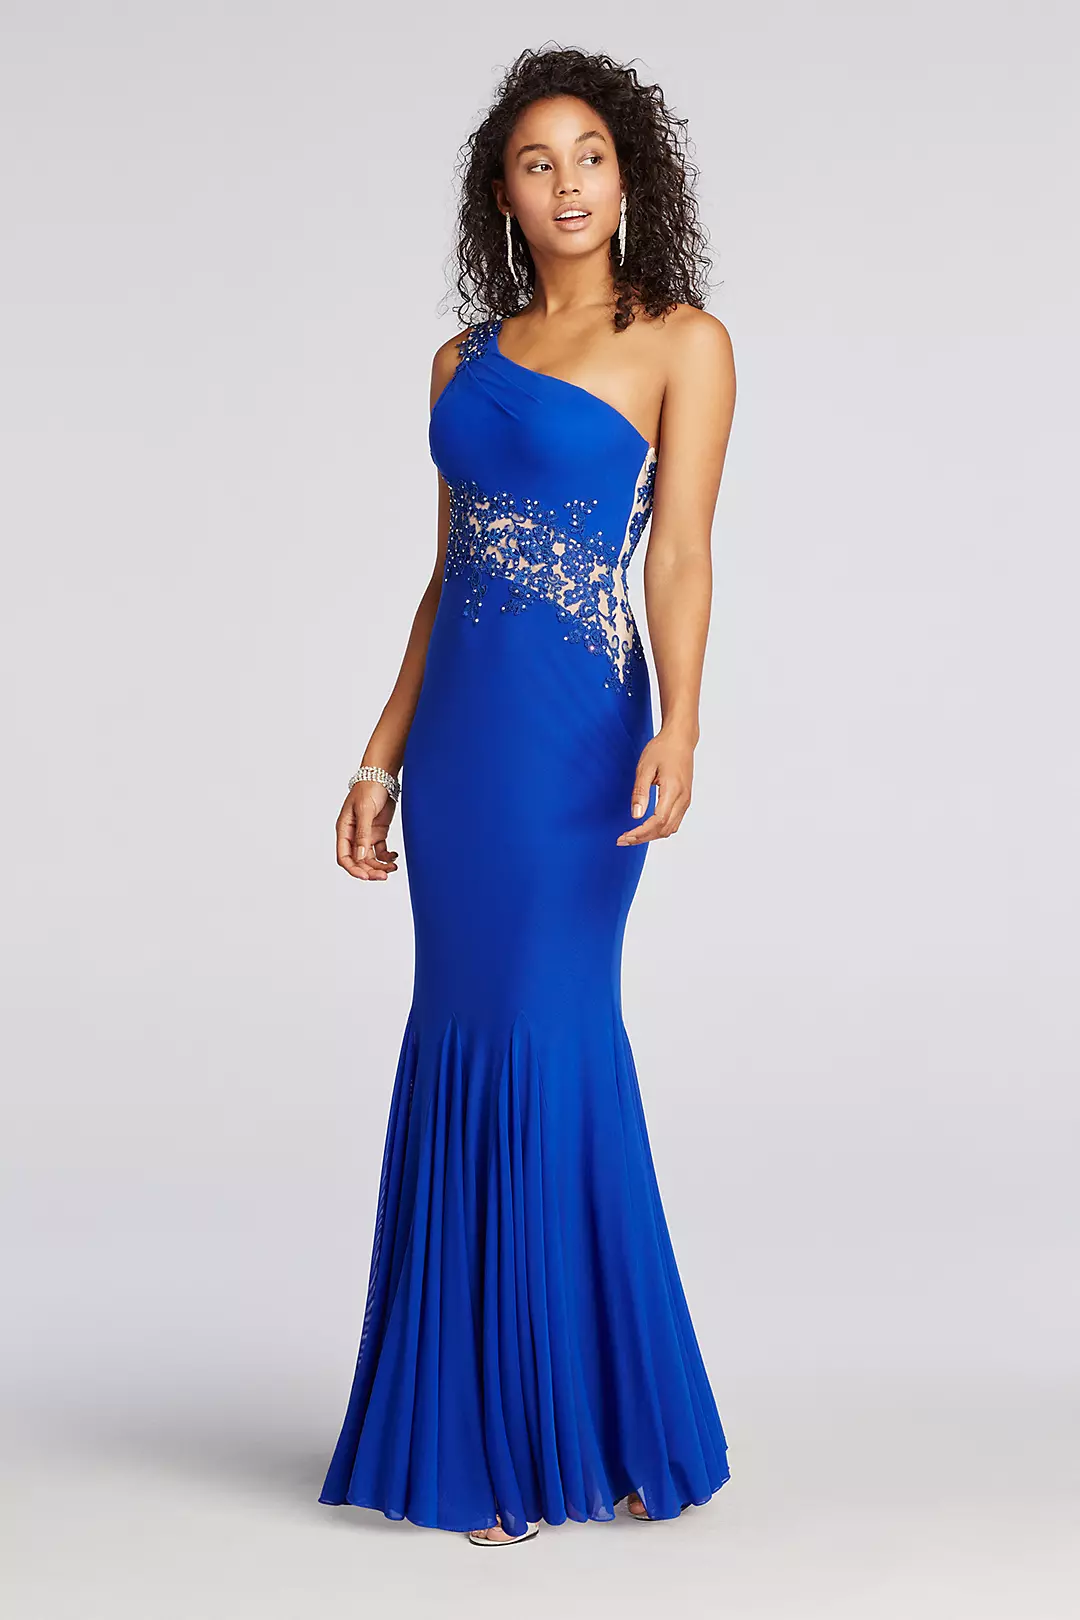 One Shoulder Jersey Beaded Illusion Prom Dress Image